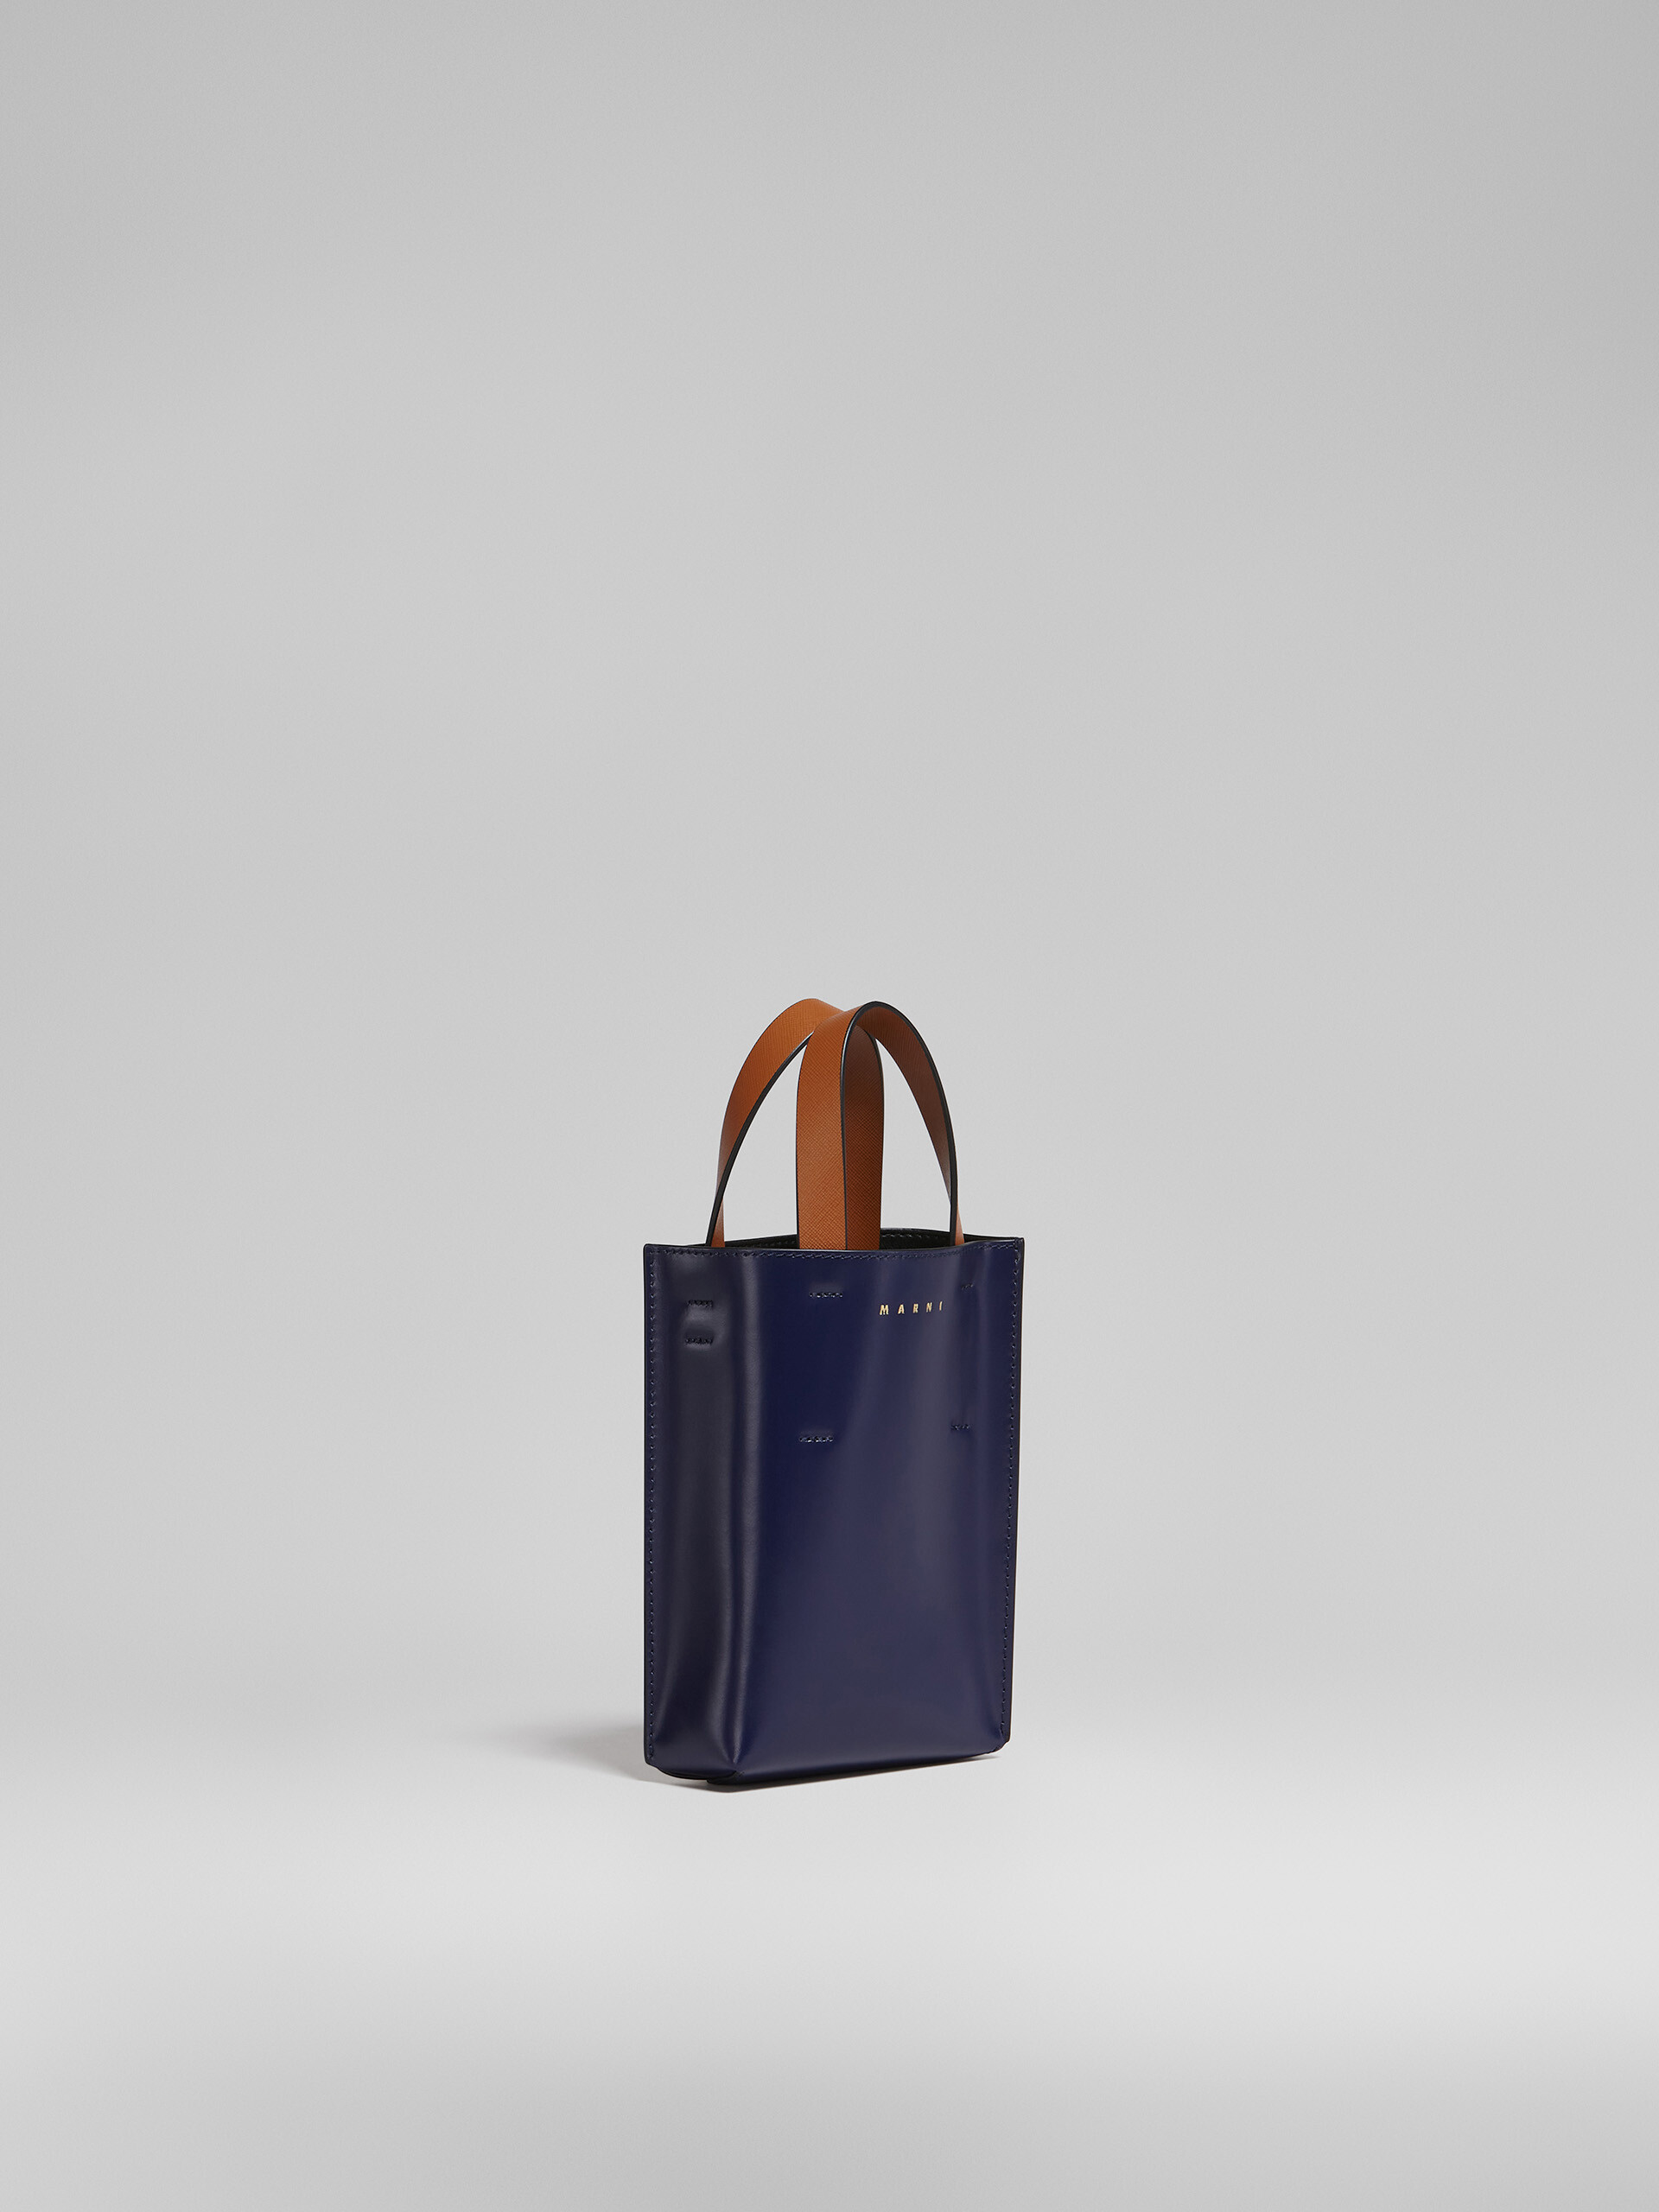 MUSEO nano bag in blue and white leather